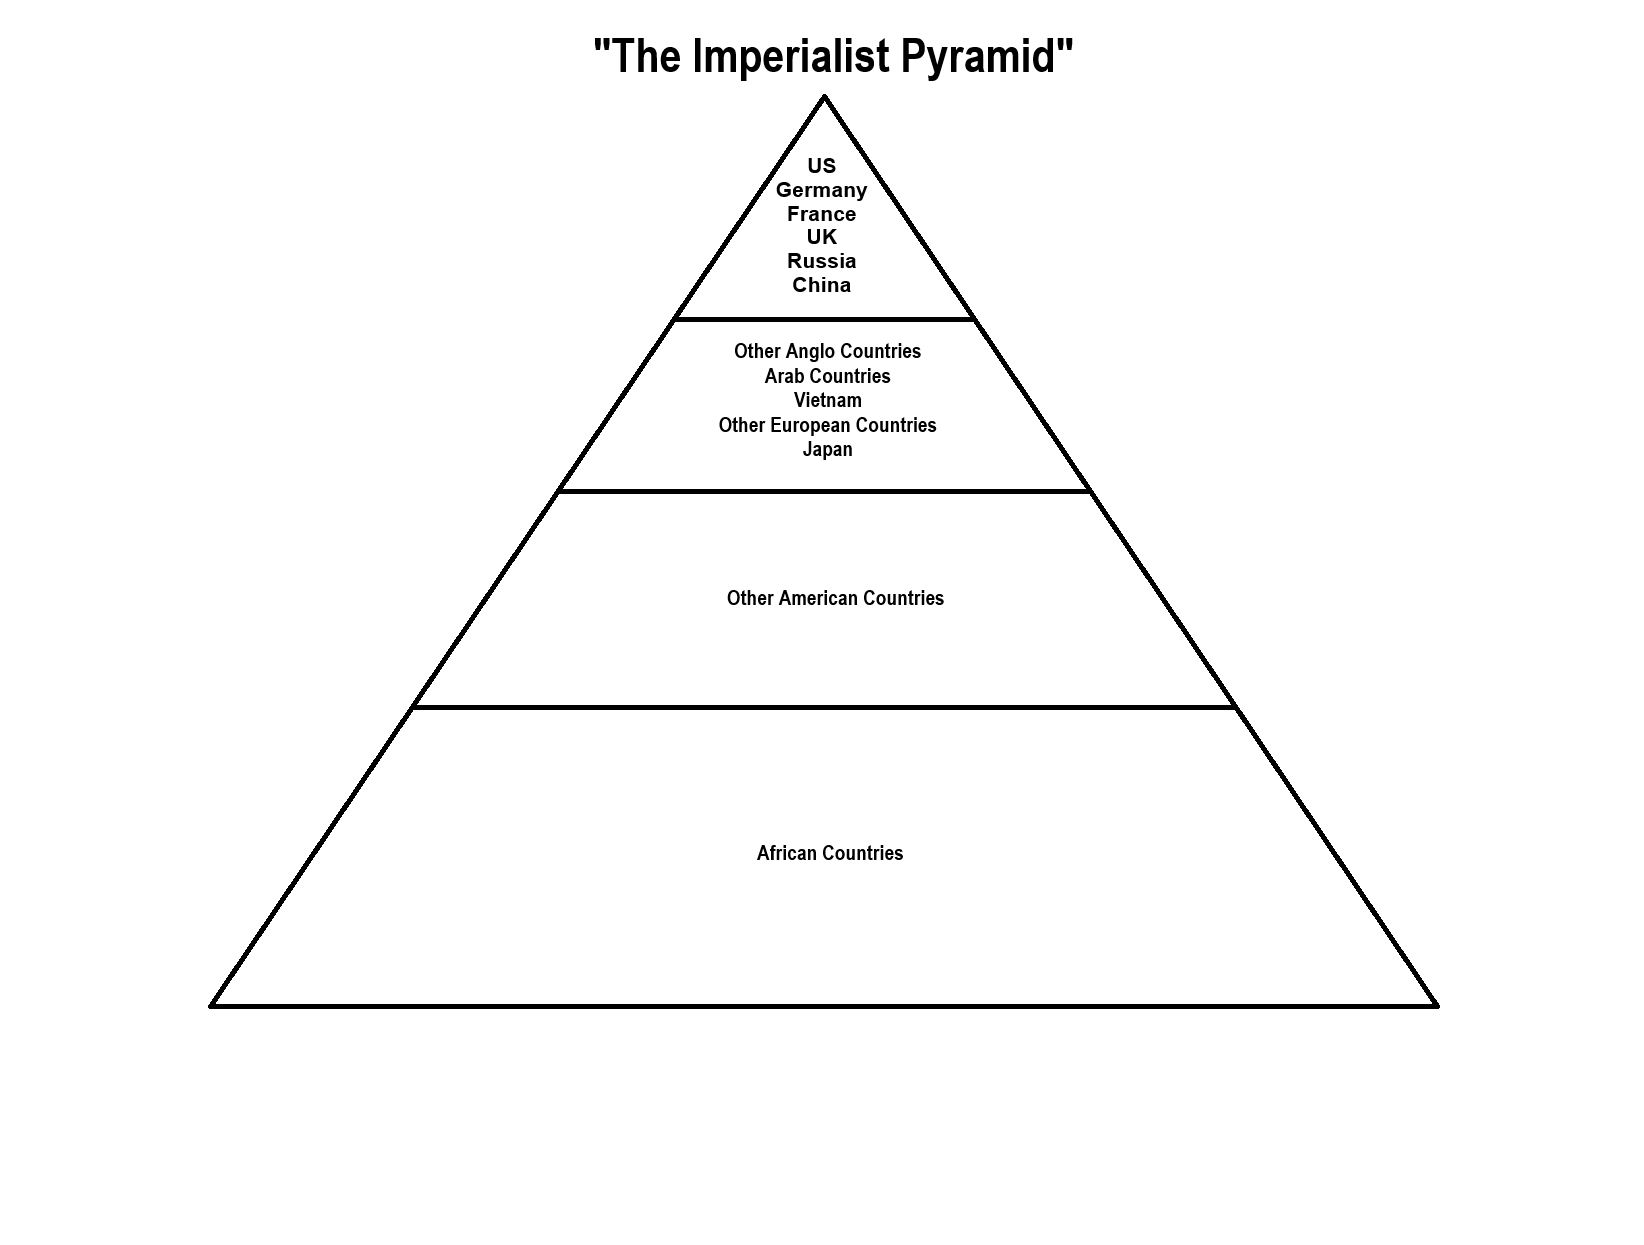 File:Imperialist Pyramid.png